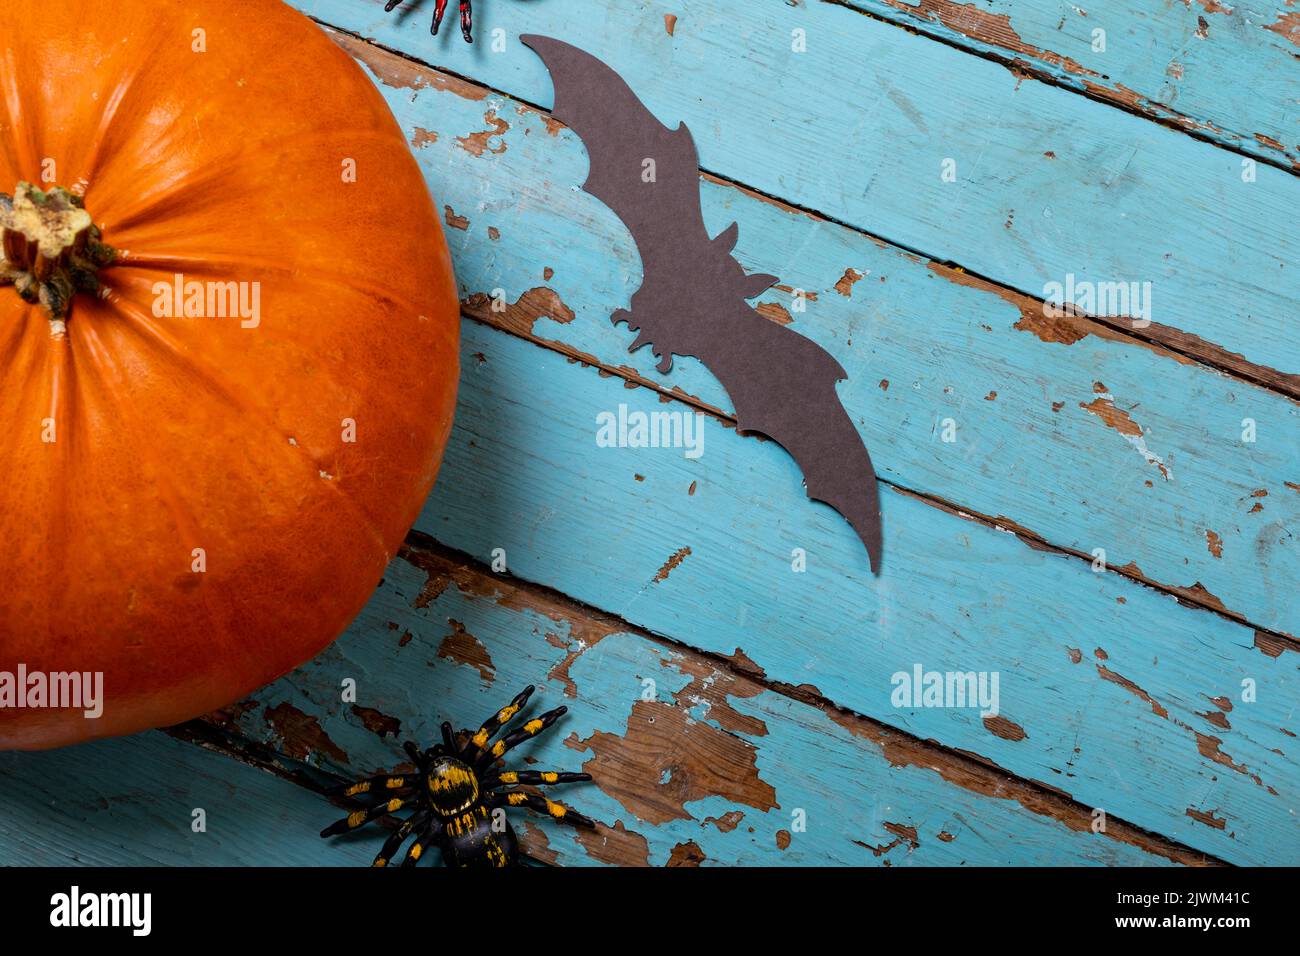 Pumpkin, spider and bat toys with copy space on blue wooden surface Stock Photo